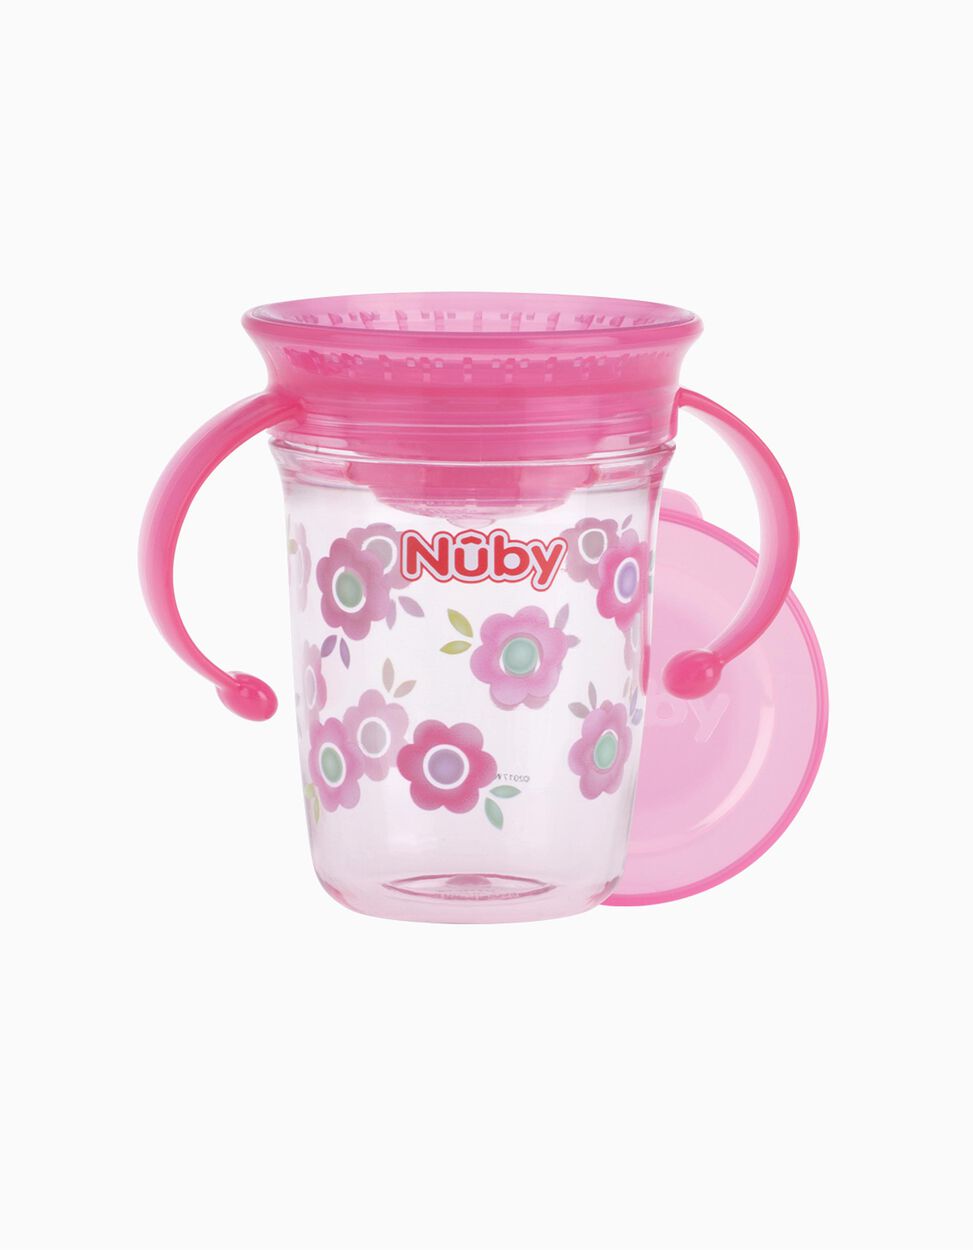 360 Cup with Tritan Handles, 240ml 6M+ by Nuby